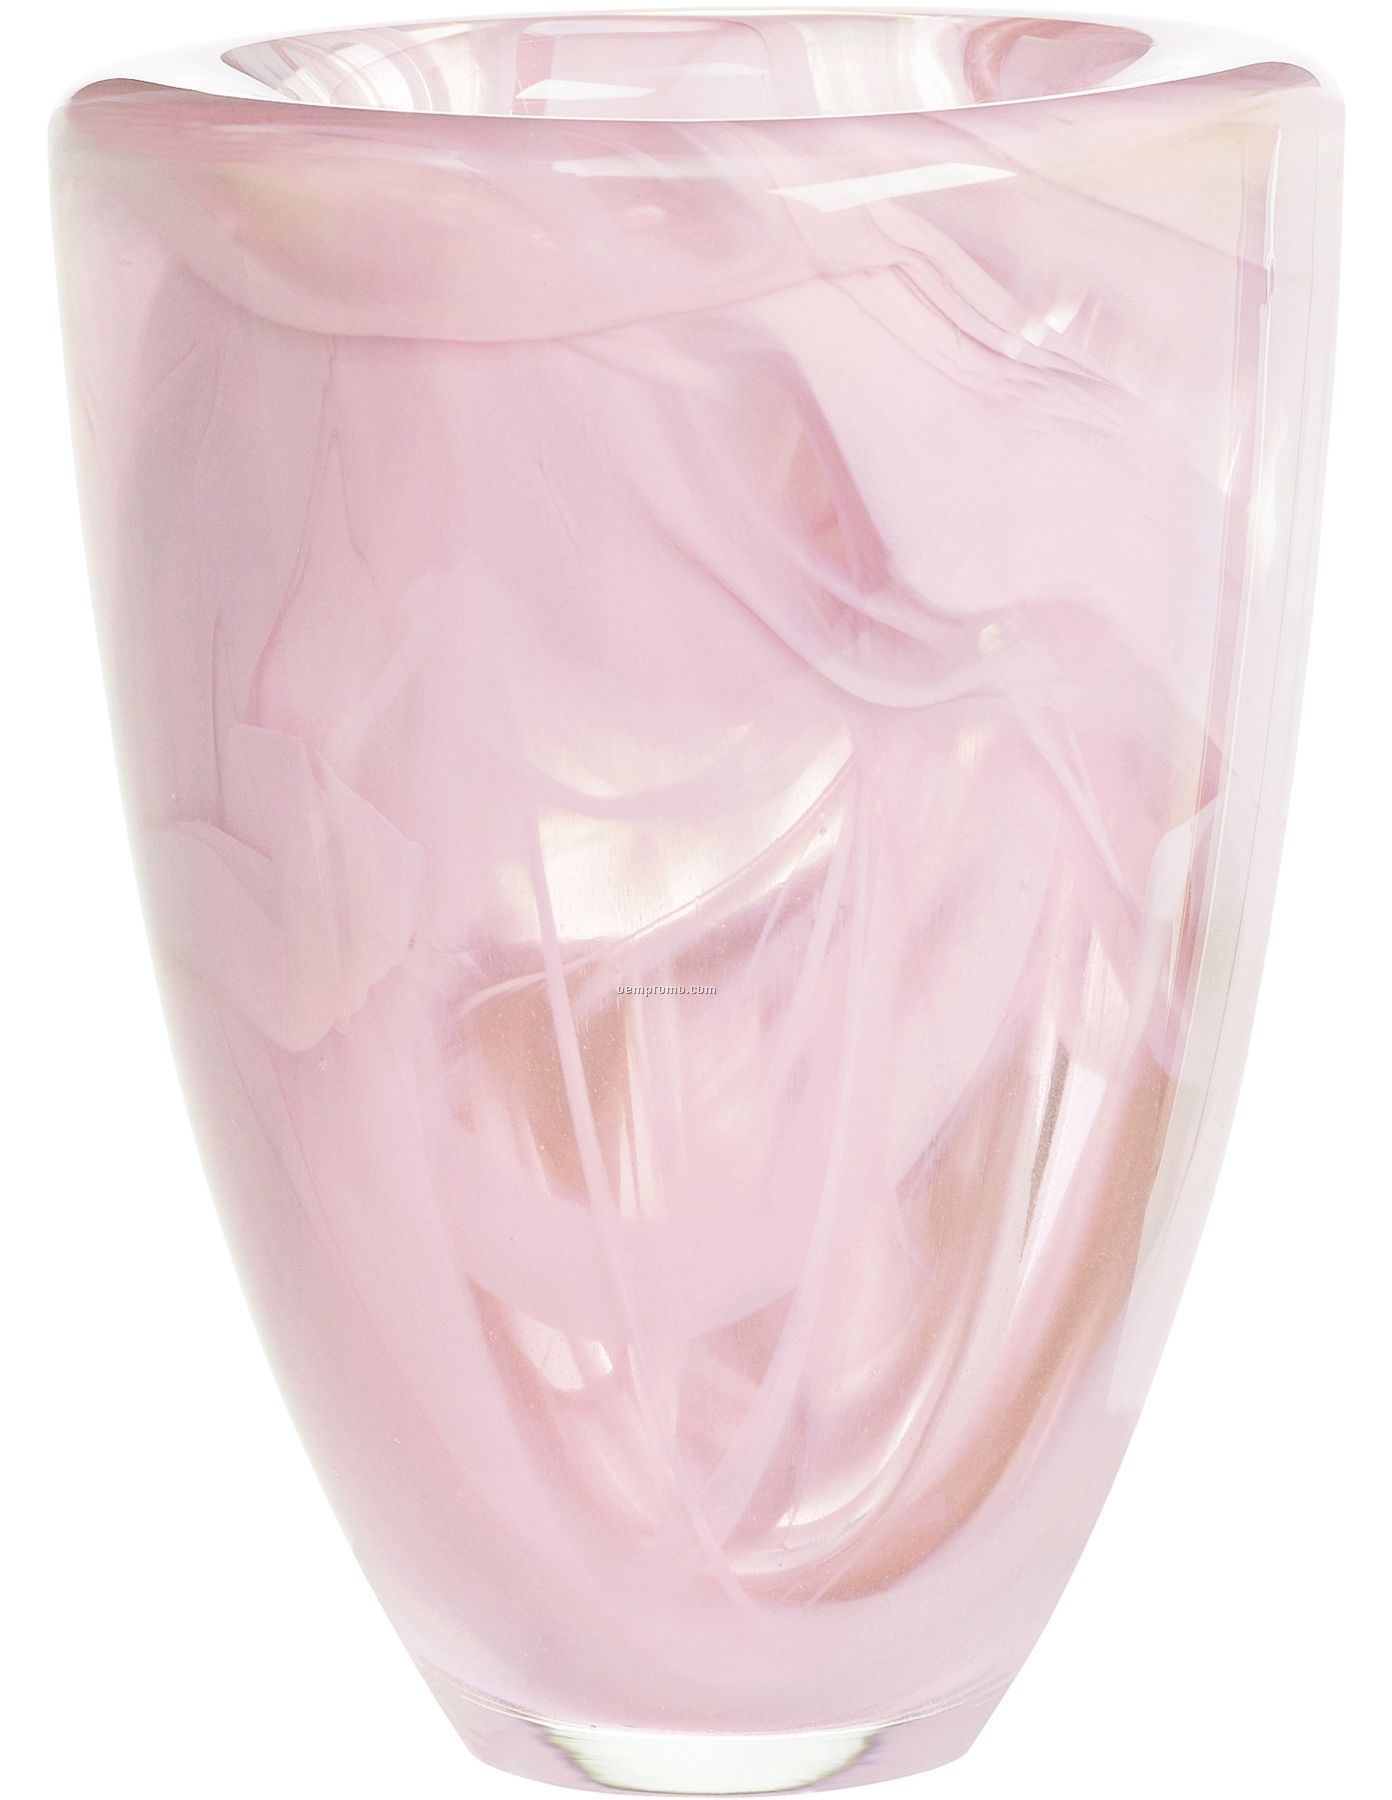 Atoll Marble Look Glass Vase By Anna Ehrner (Light Pink)